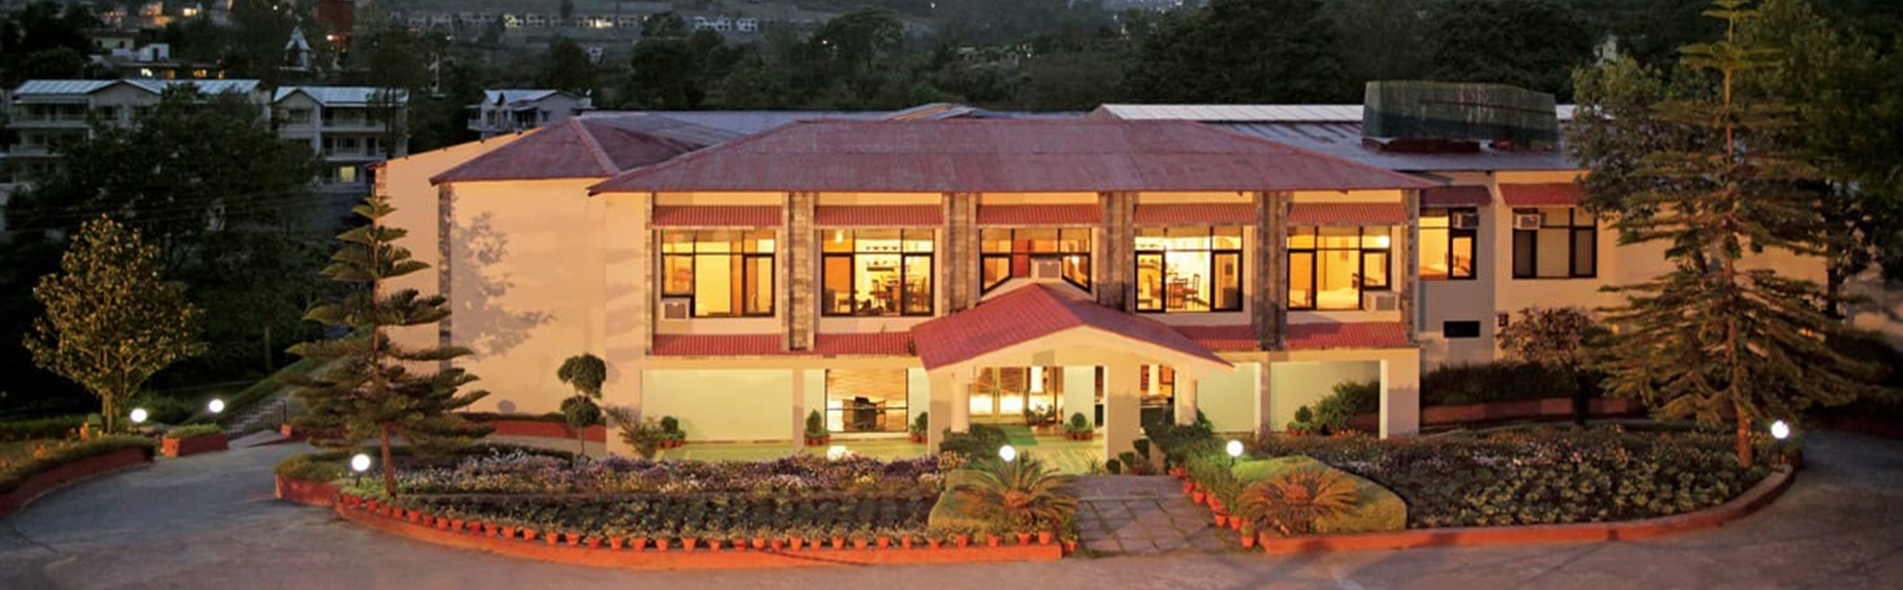 Country Inn Hotels and  Resorts, India